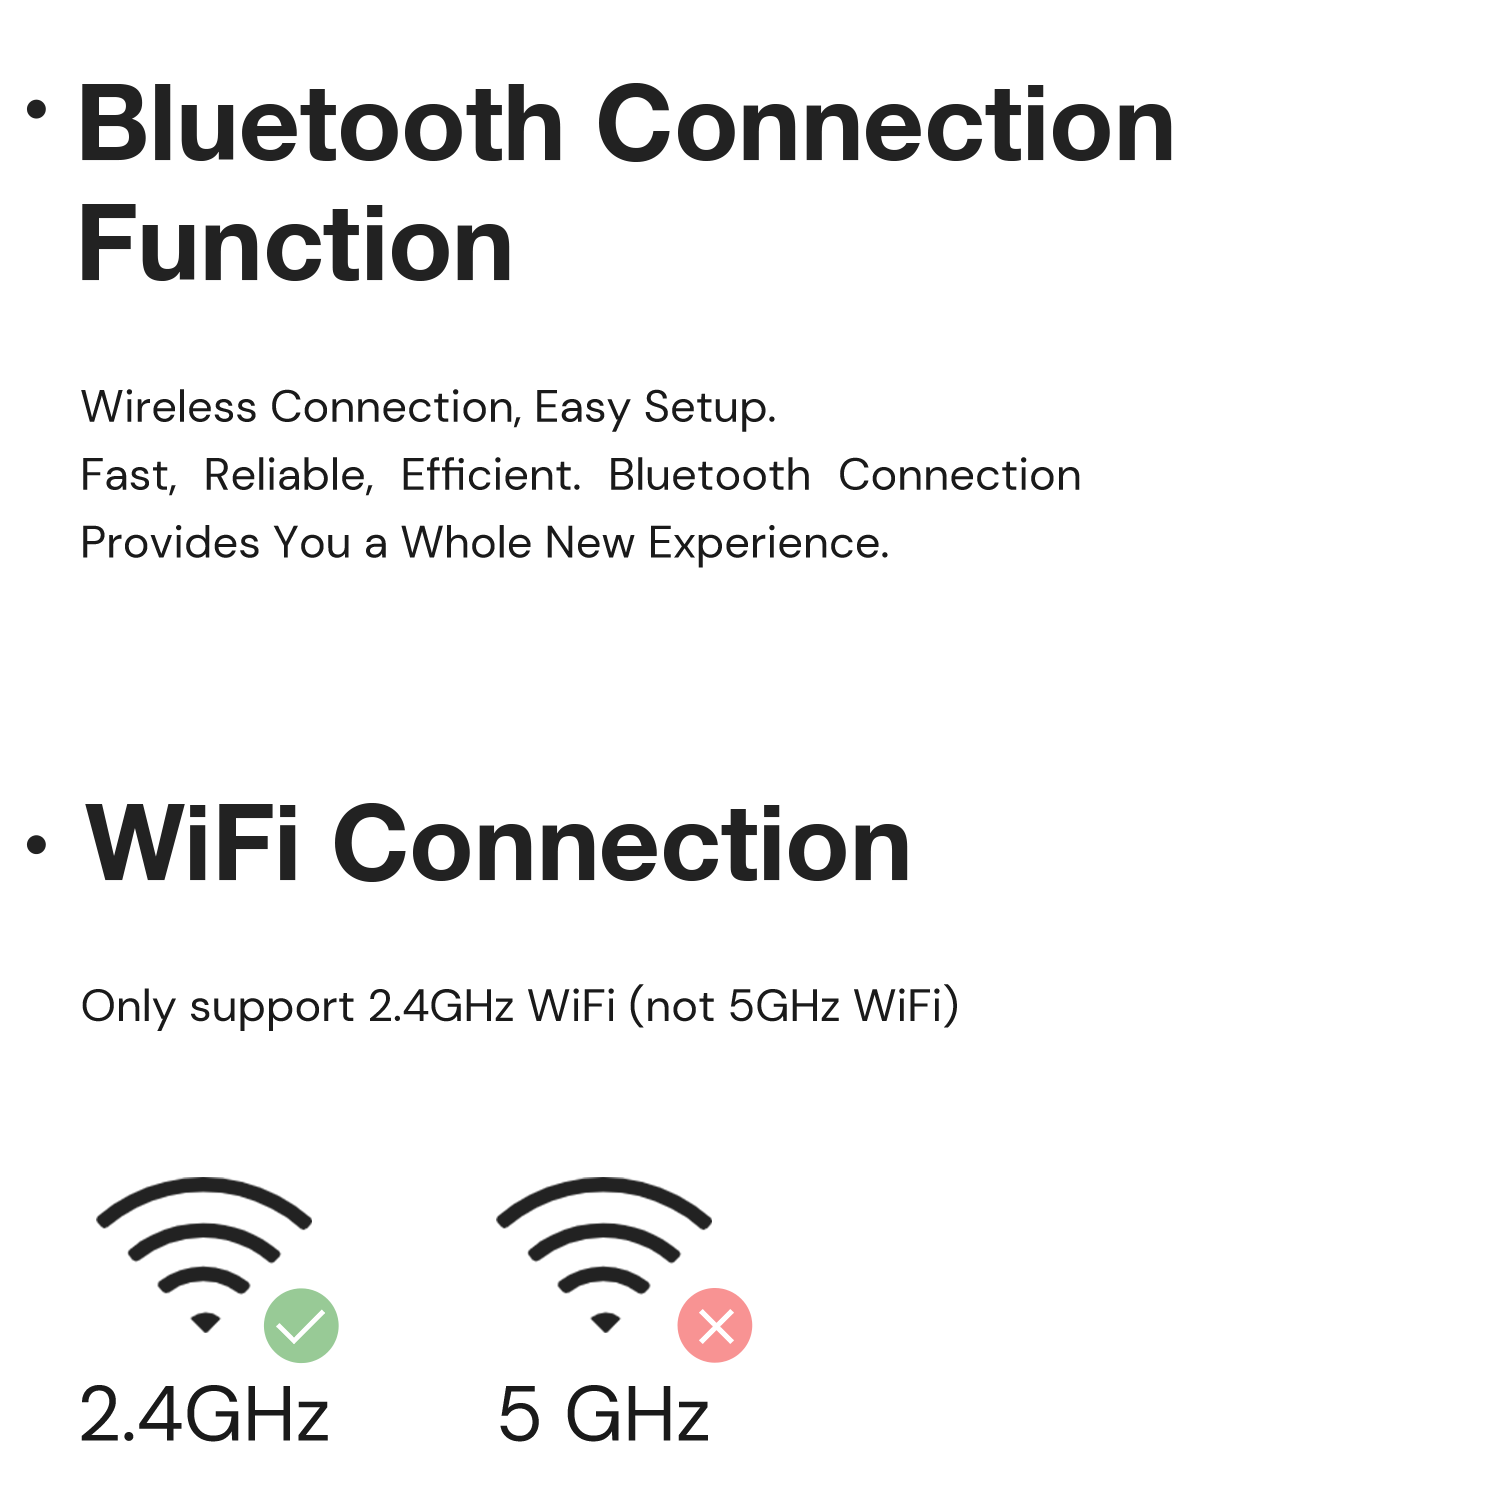 security camera features Bluetooth connection and WiFi connection